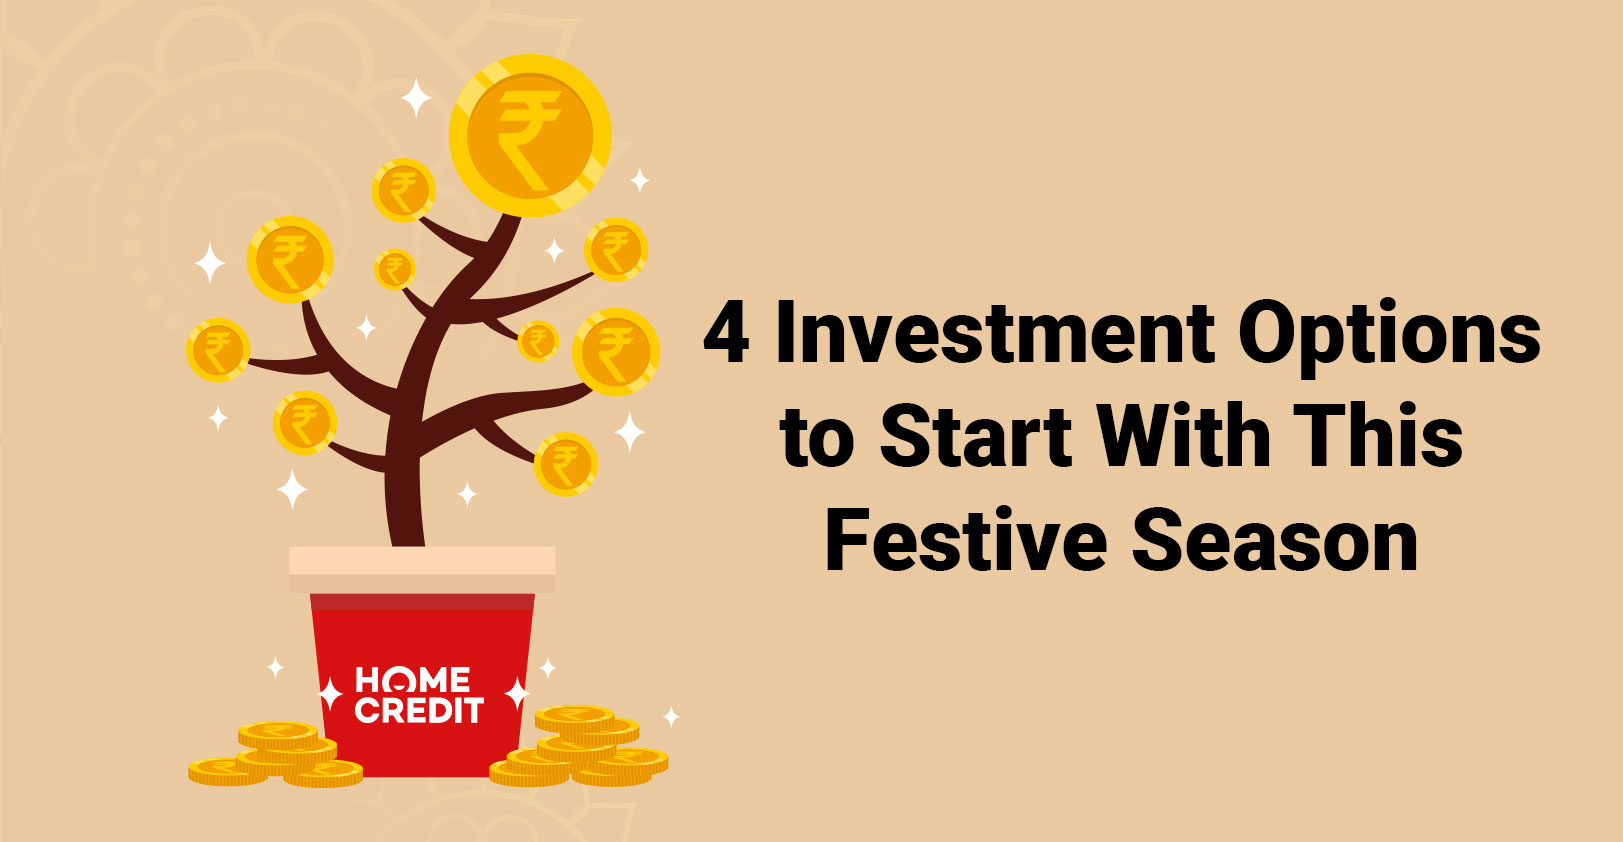 4 Investment Options to Start with This Festive Season